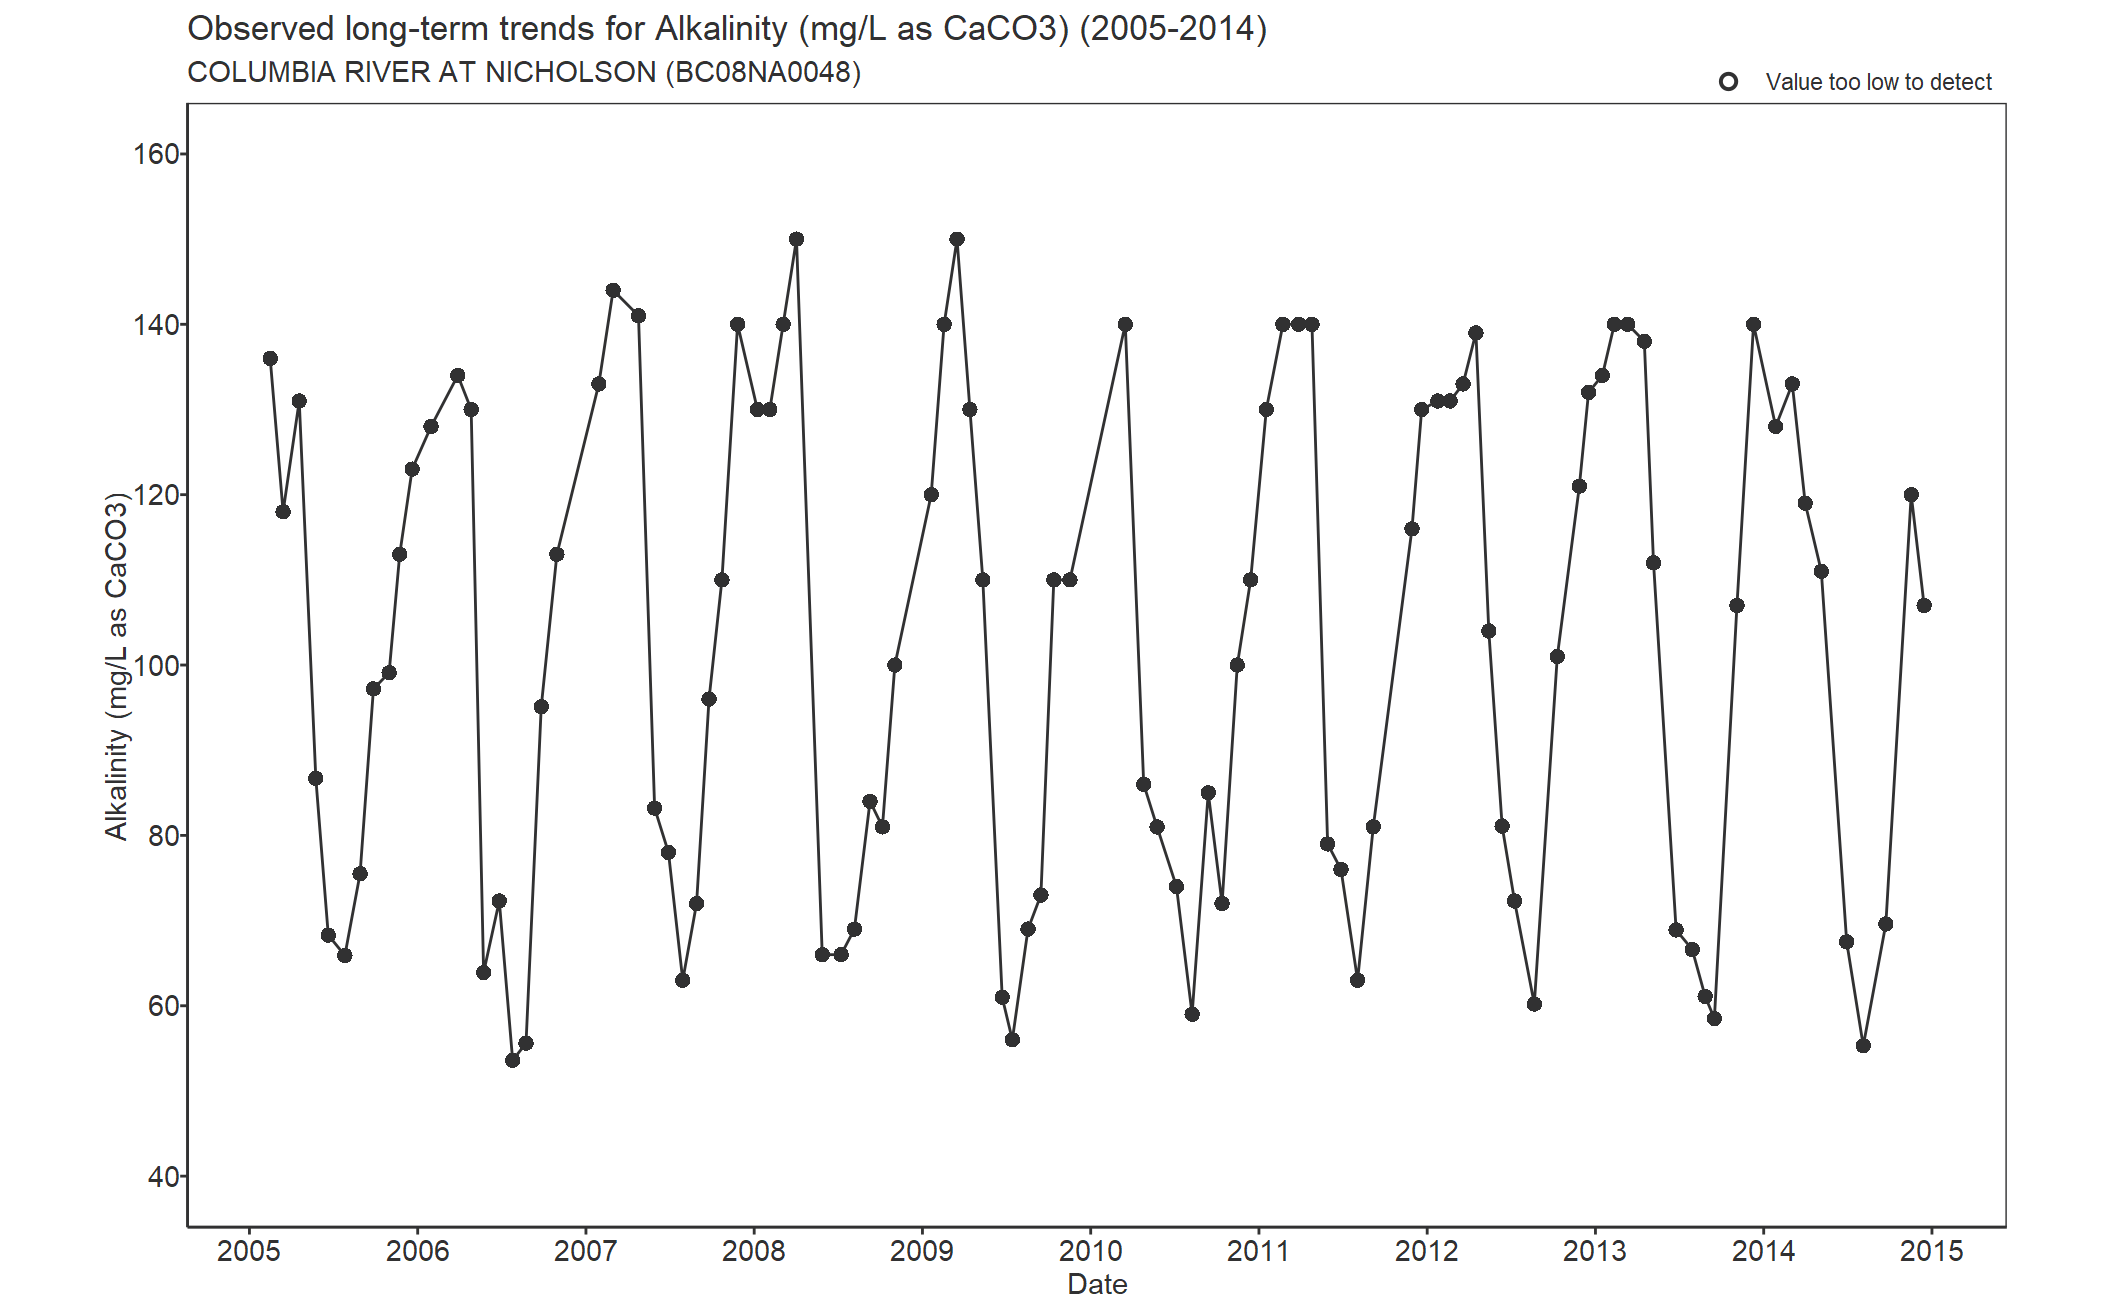 Observed long-term trends for Alkalinity Total CaCO3 (2005-2014)